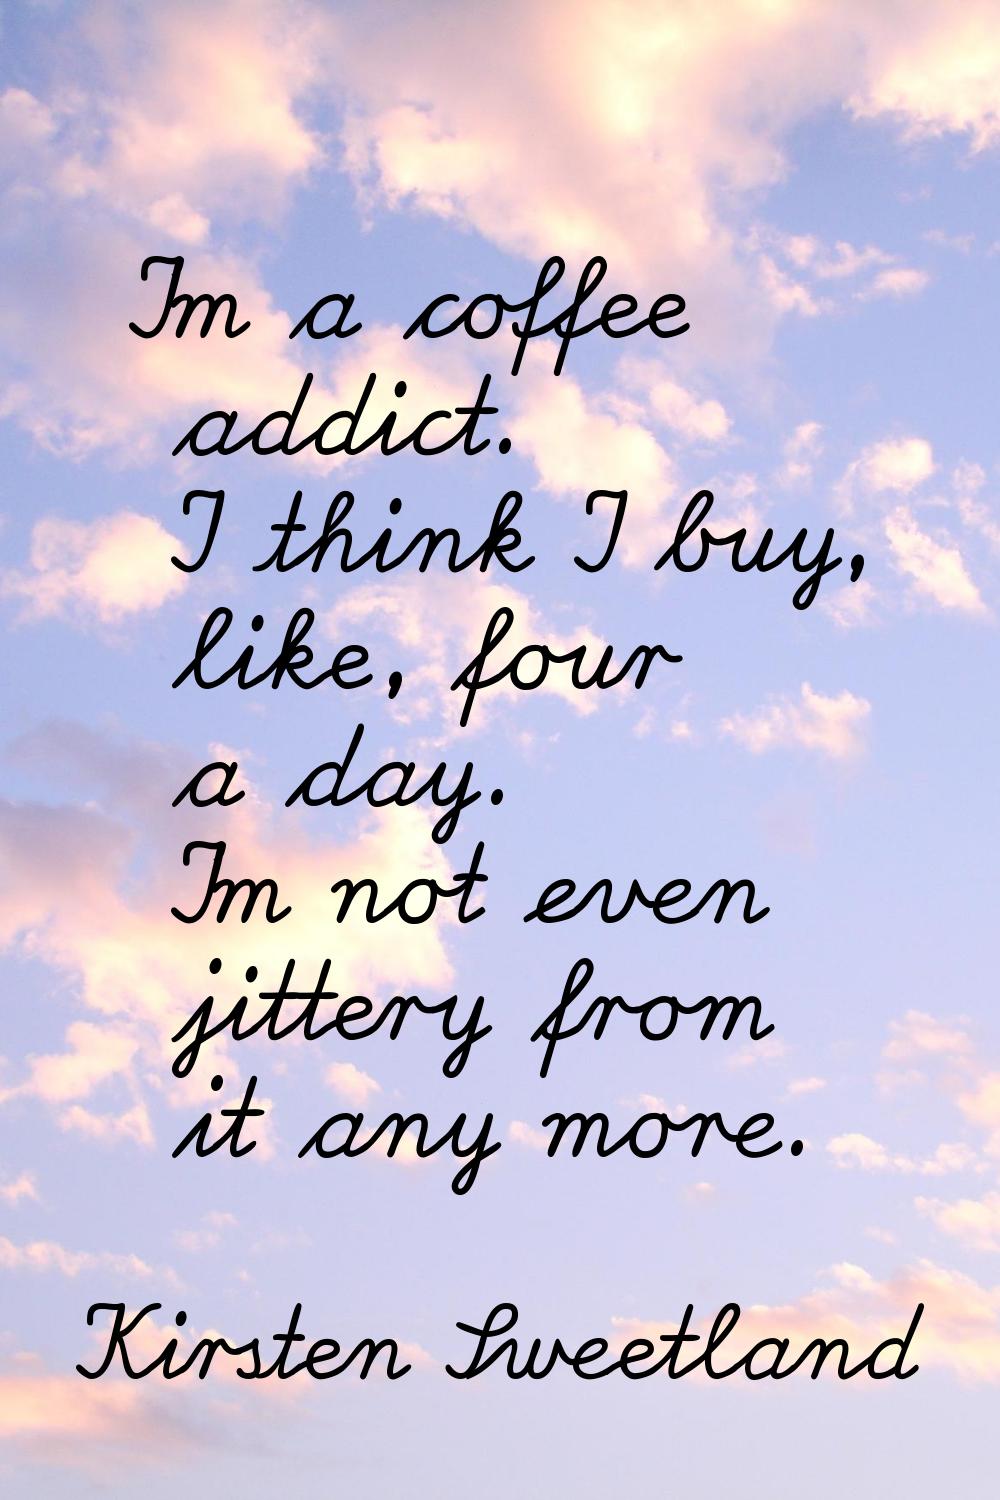 I'm a coffee addict. I think I buy, like, four a day. I'm not even jittery from it any more.